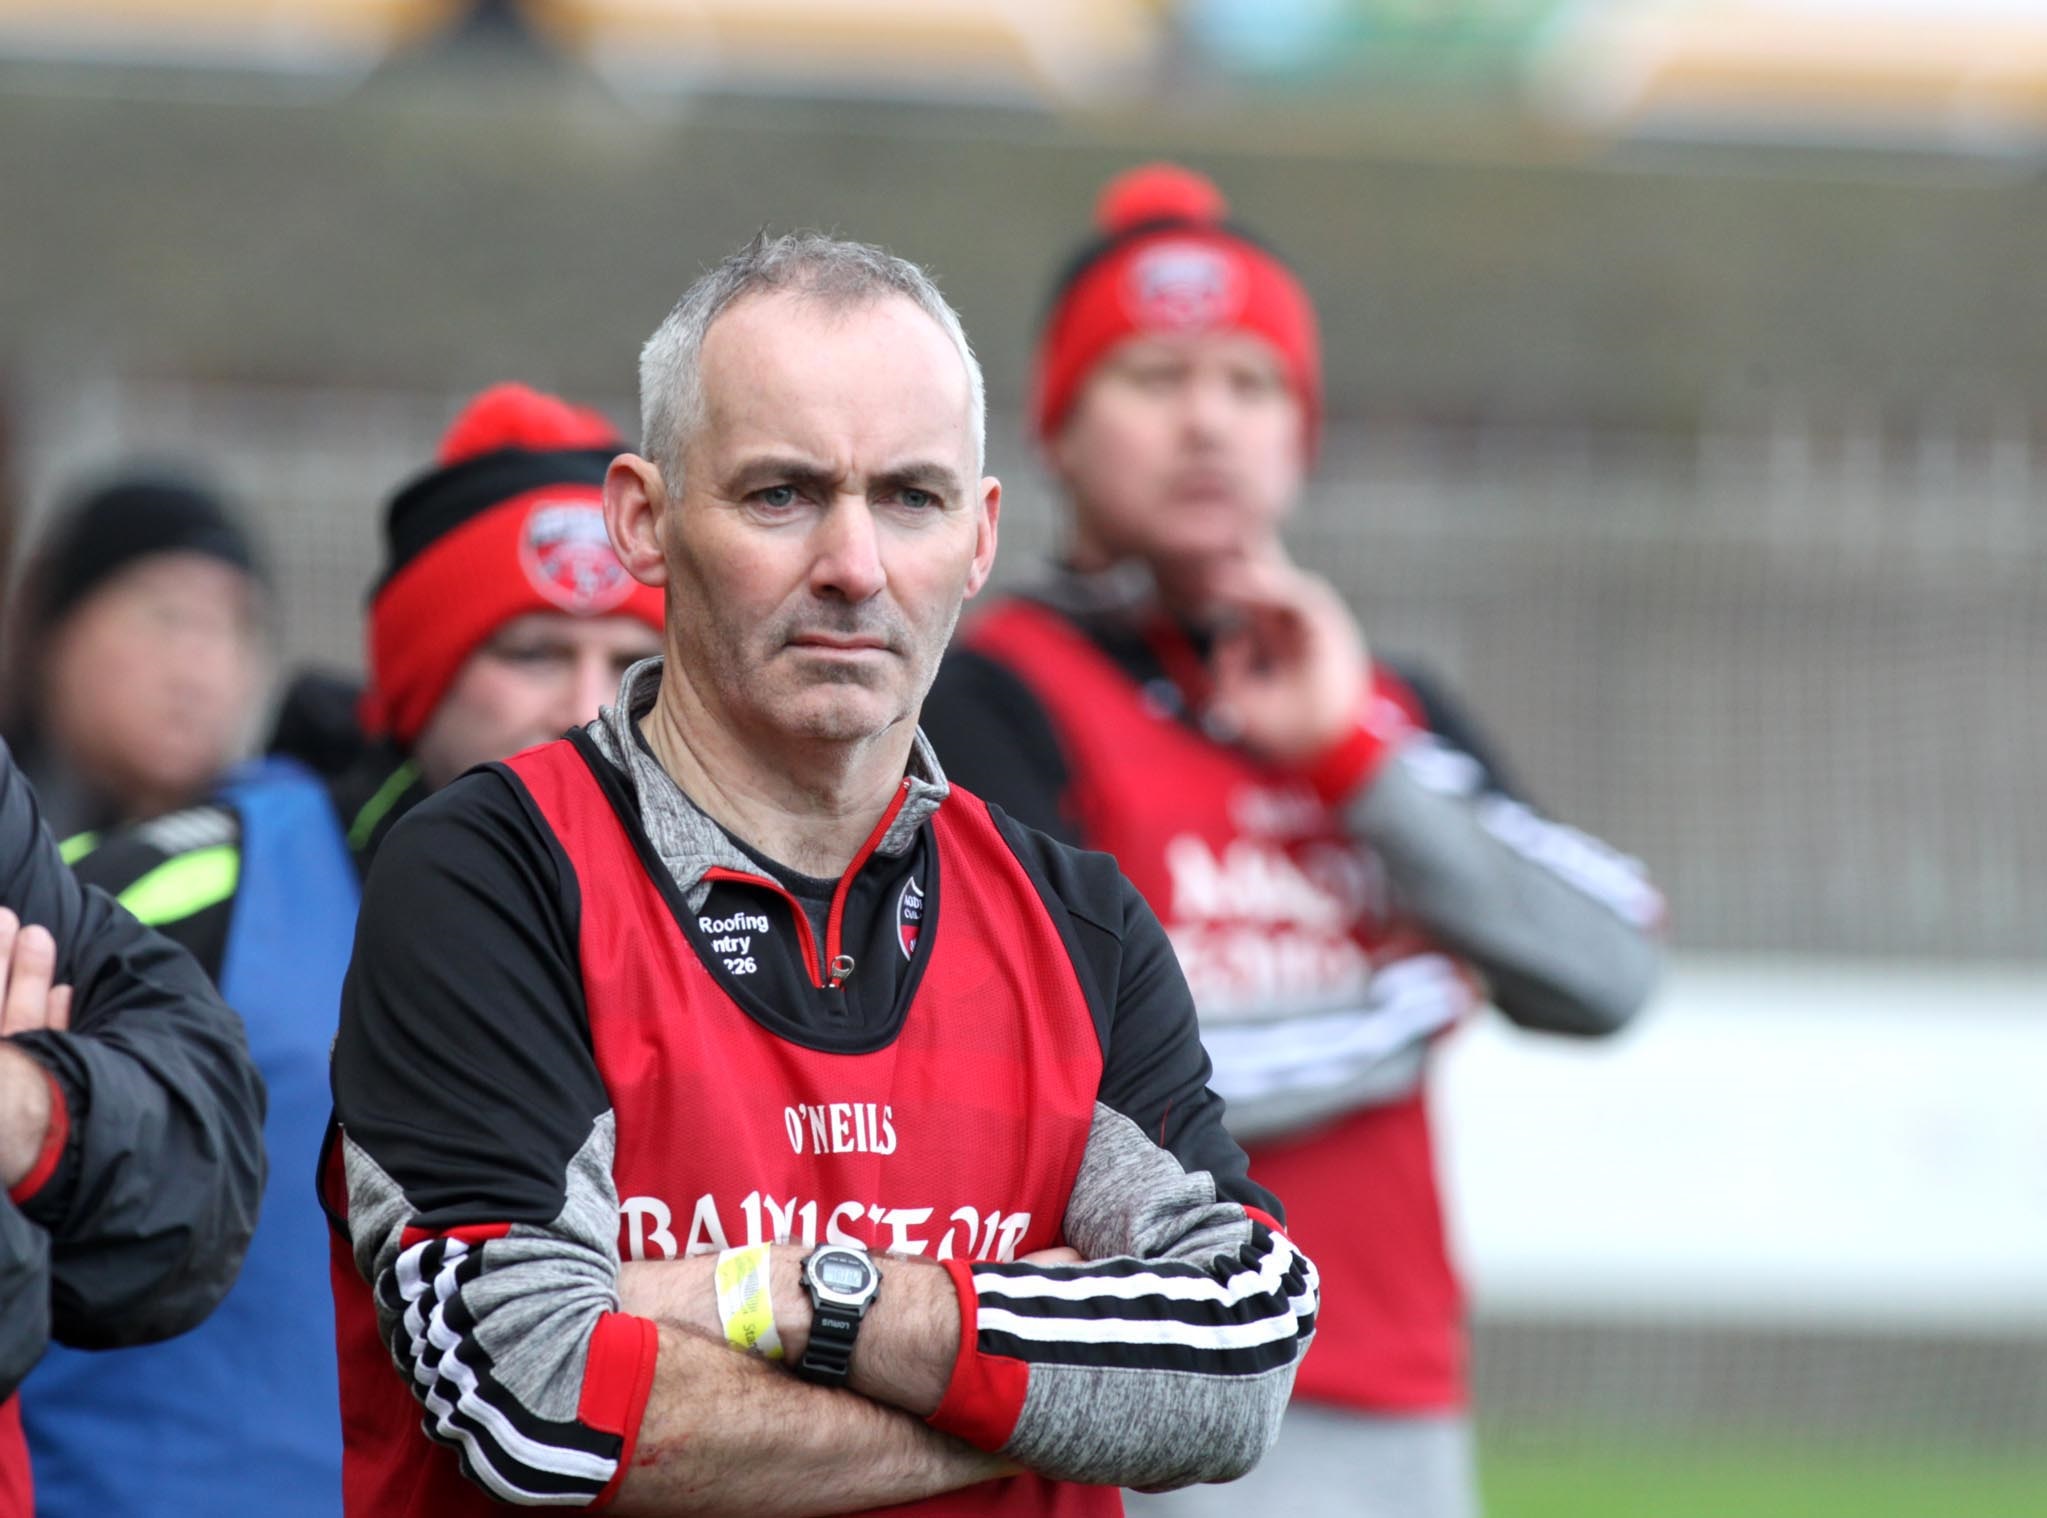 Naomh Eoghan boss excited by new challenge